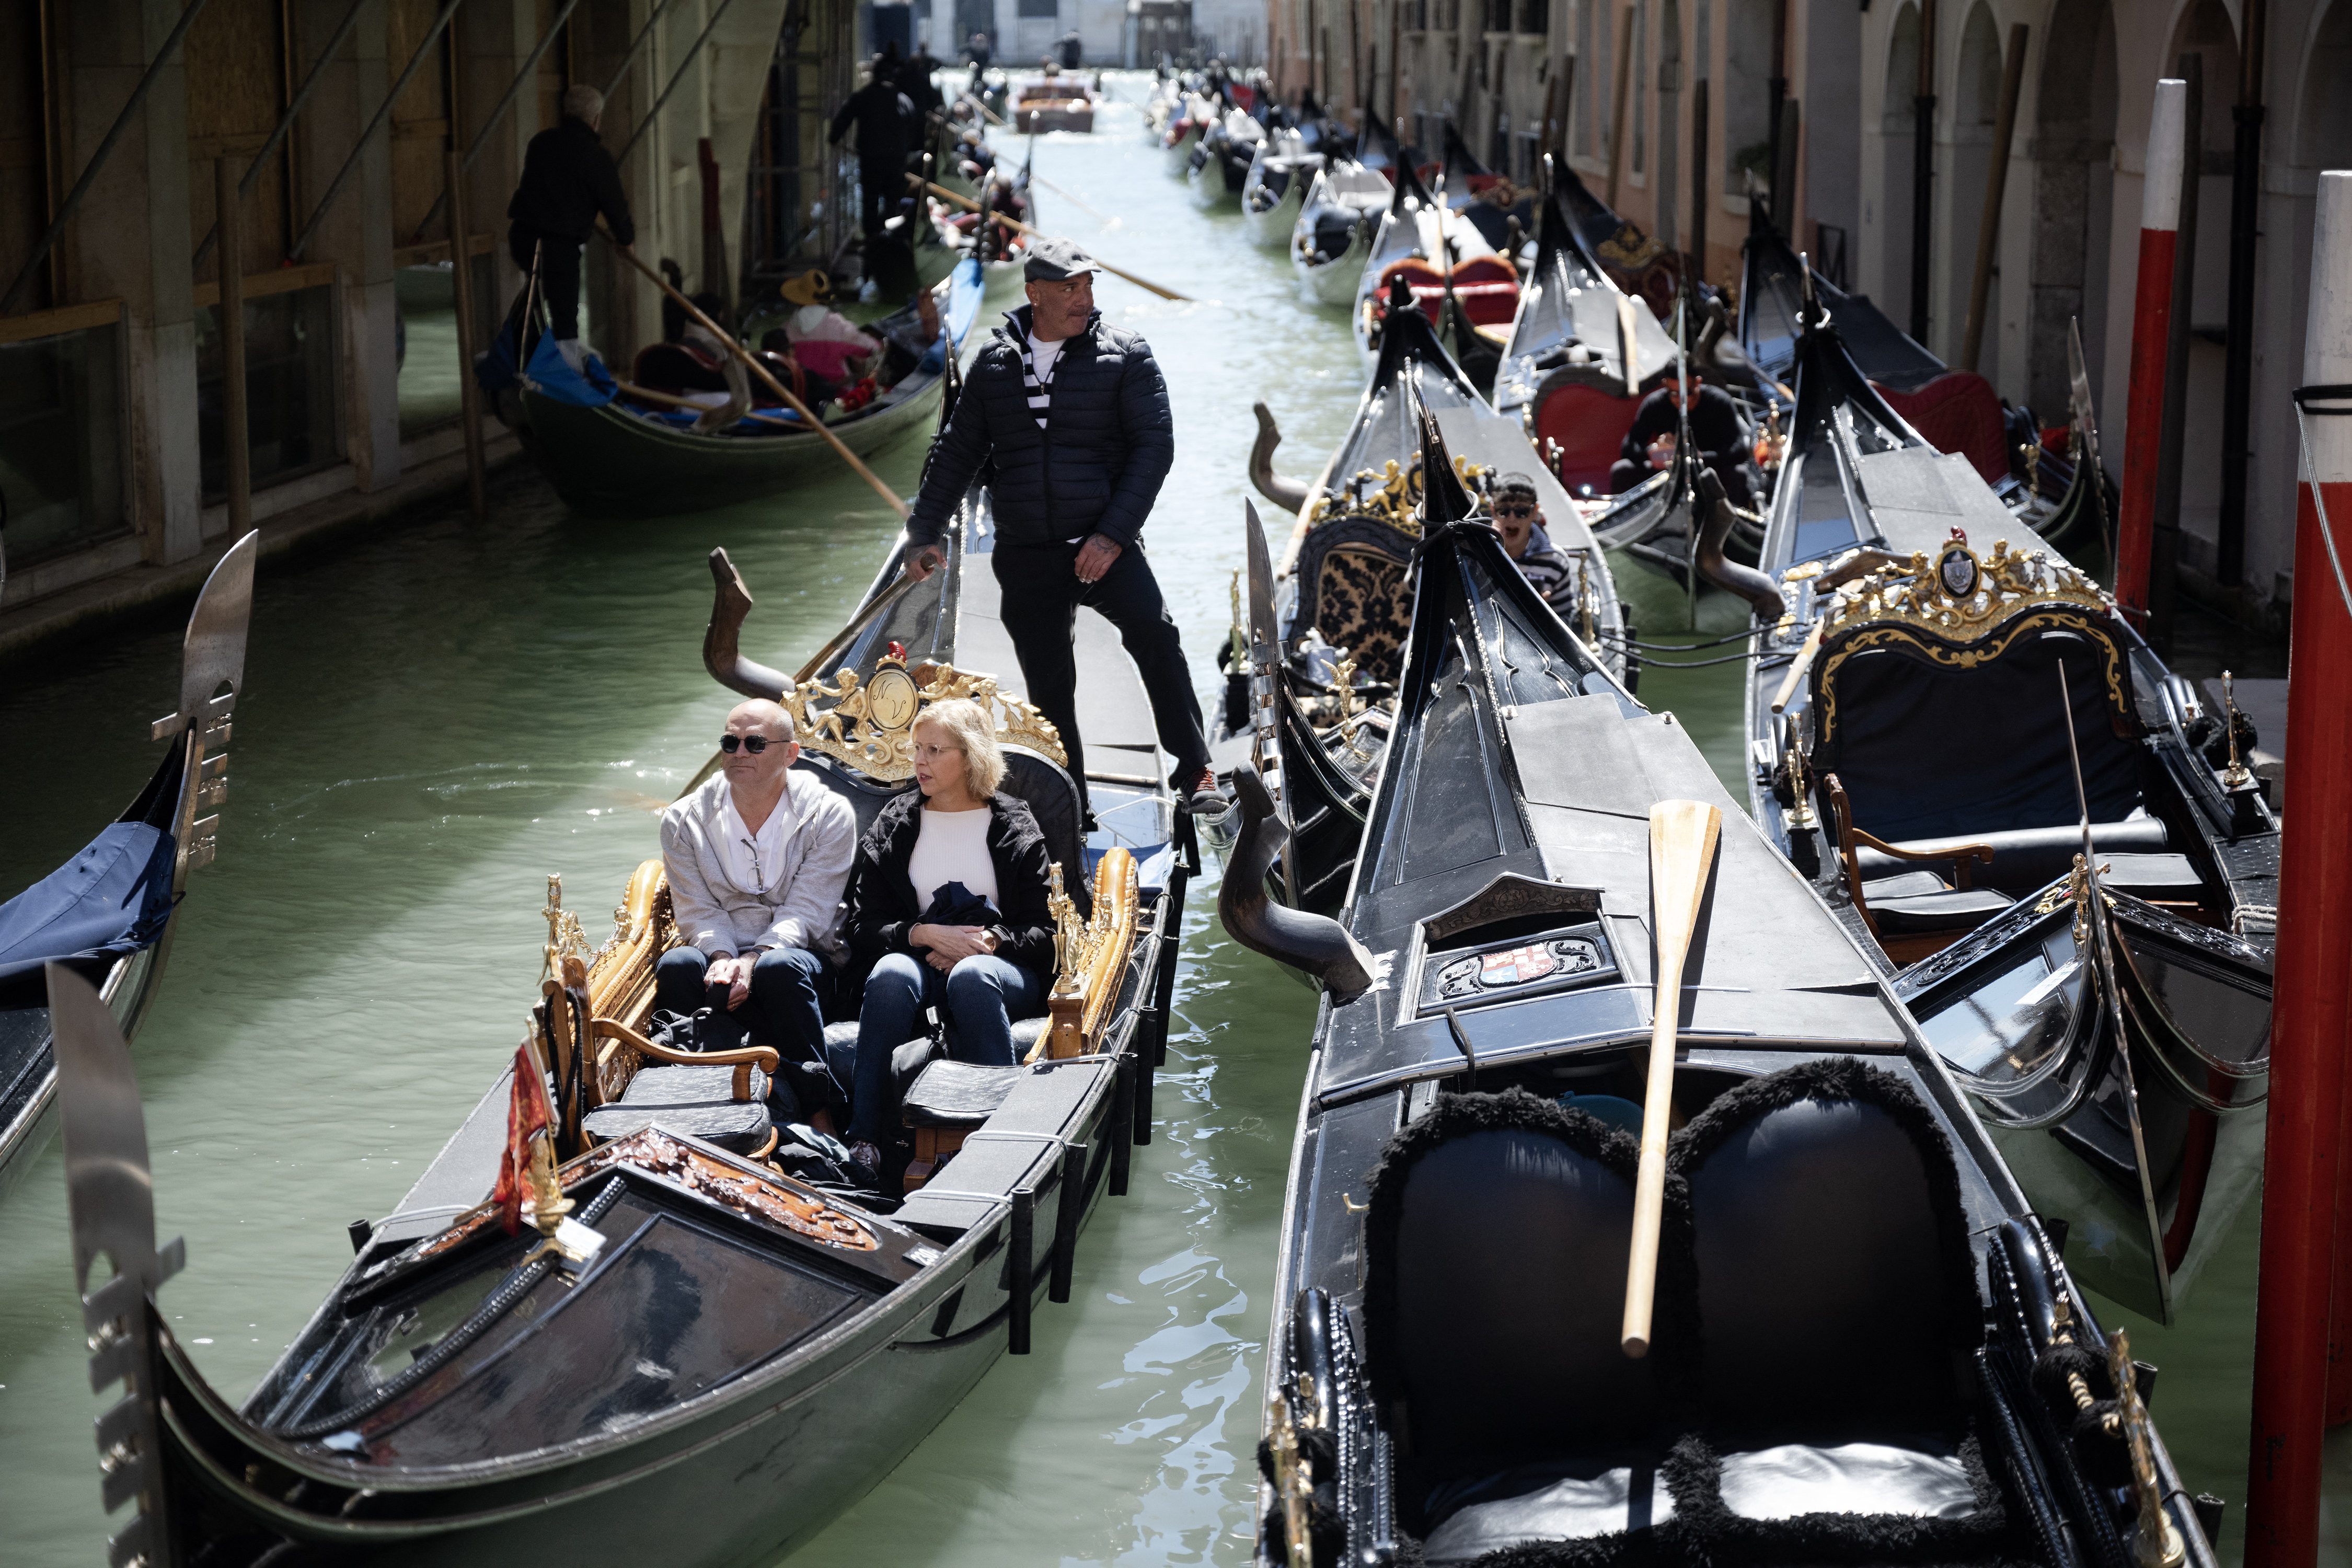 A gondolier sails with two customers near San Marco Square in Venice today